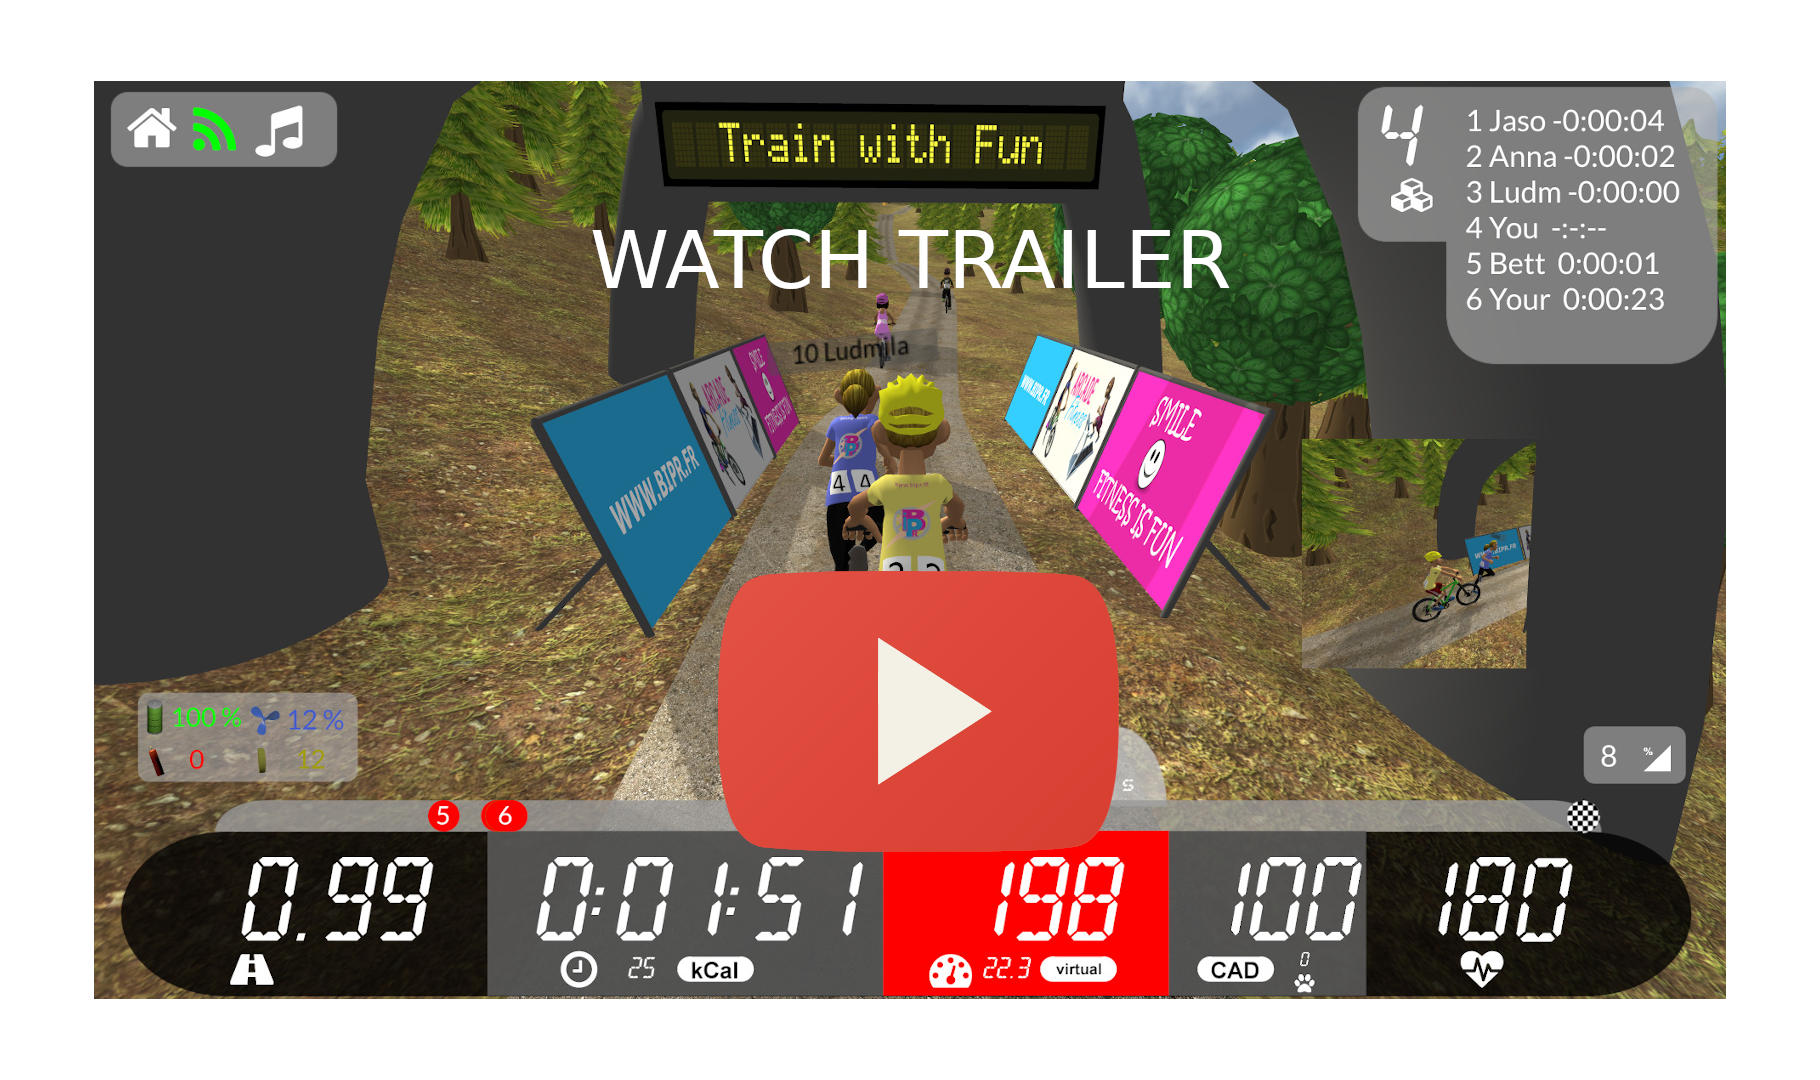 Arcade Fitness Indoo Cycling and Running App Trailer